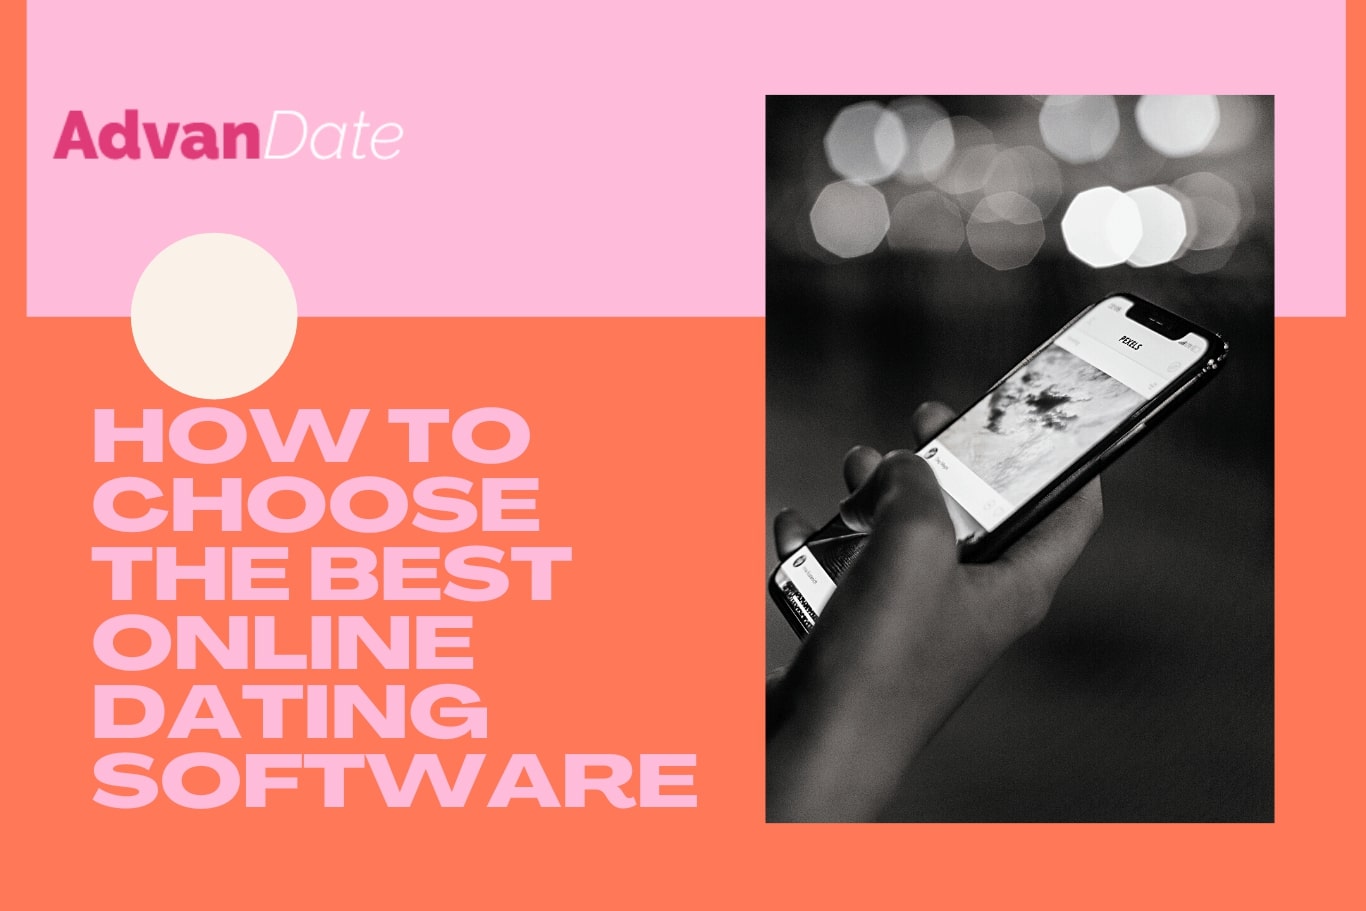 How to Choose the Best Online Dating Software? 5 Key Features to Look For